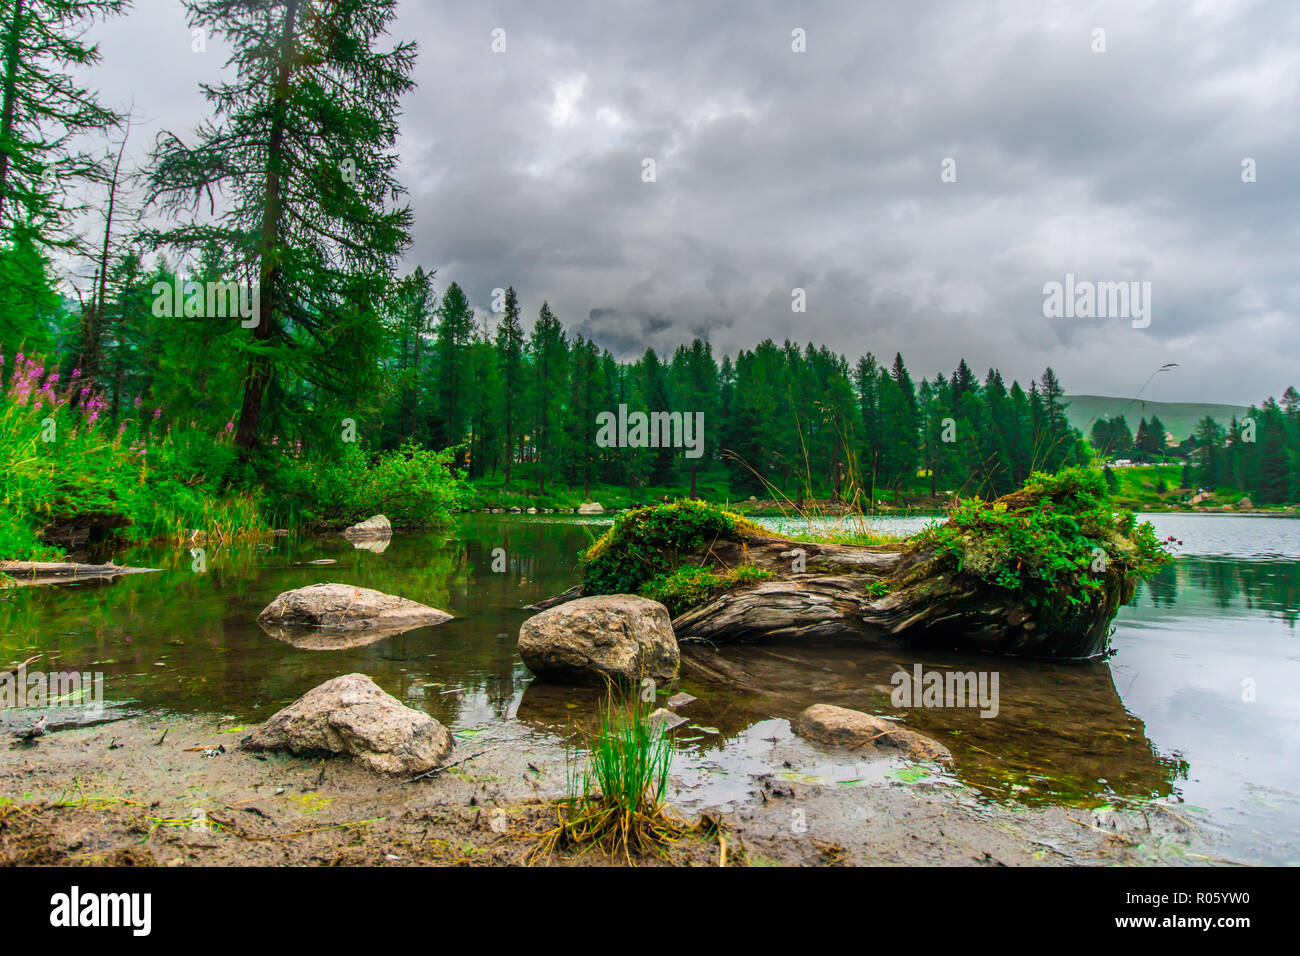 Lake San Pellegrino in summer, surrounded by nature Stock Photo